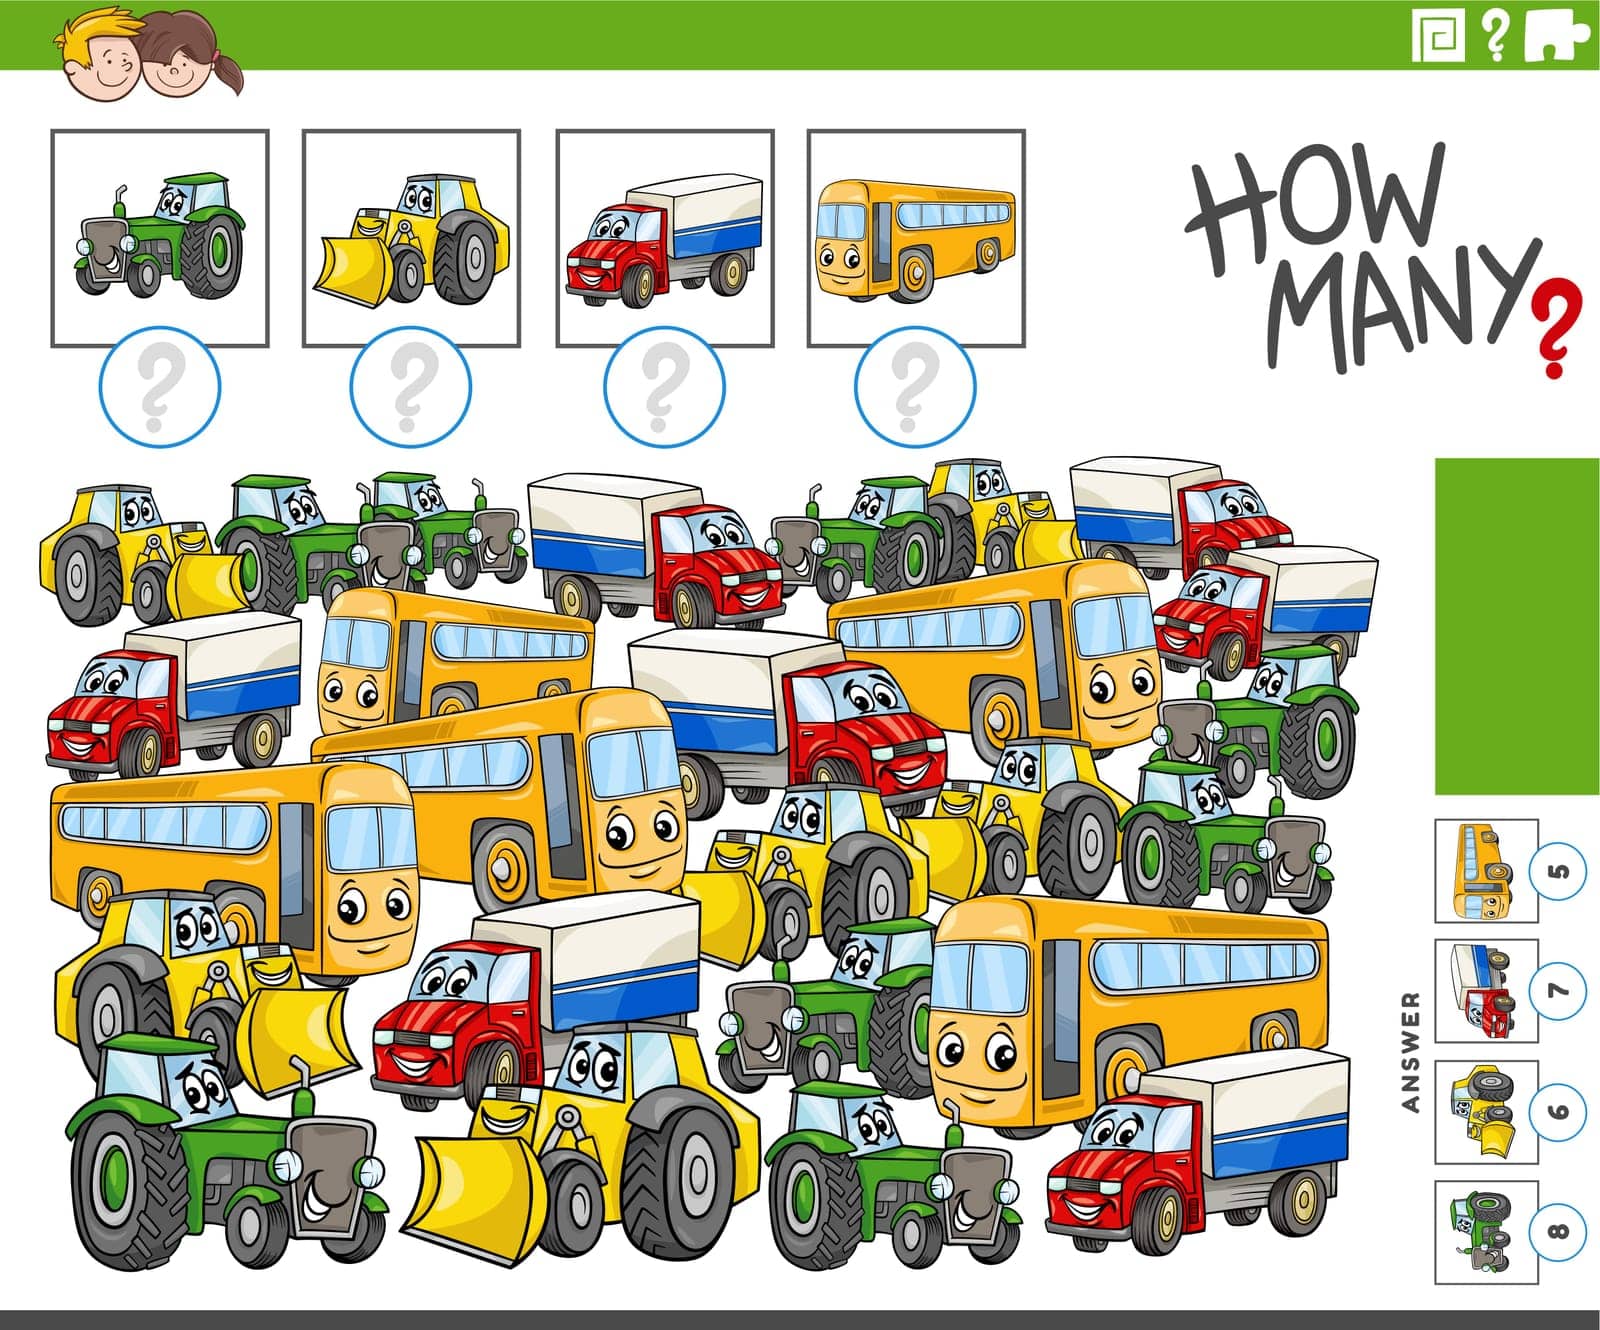 Illustration of educational counting game with funny cartoon vehicles characters